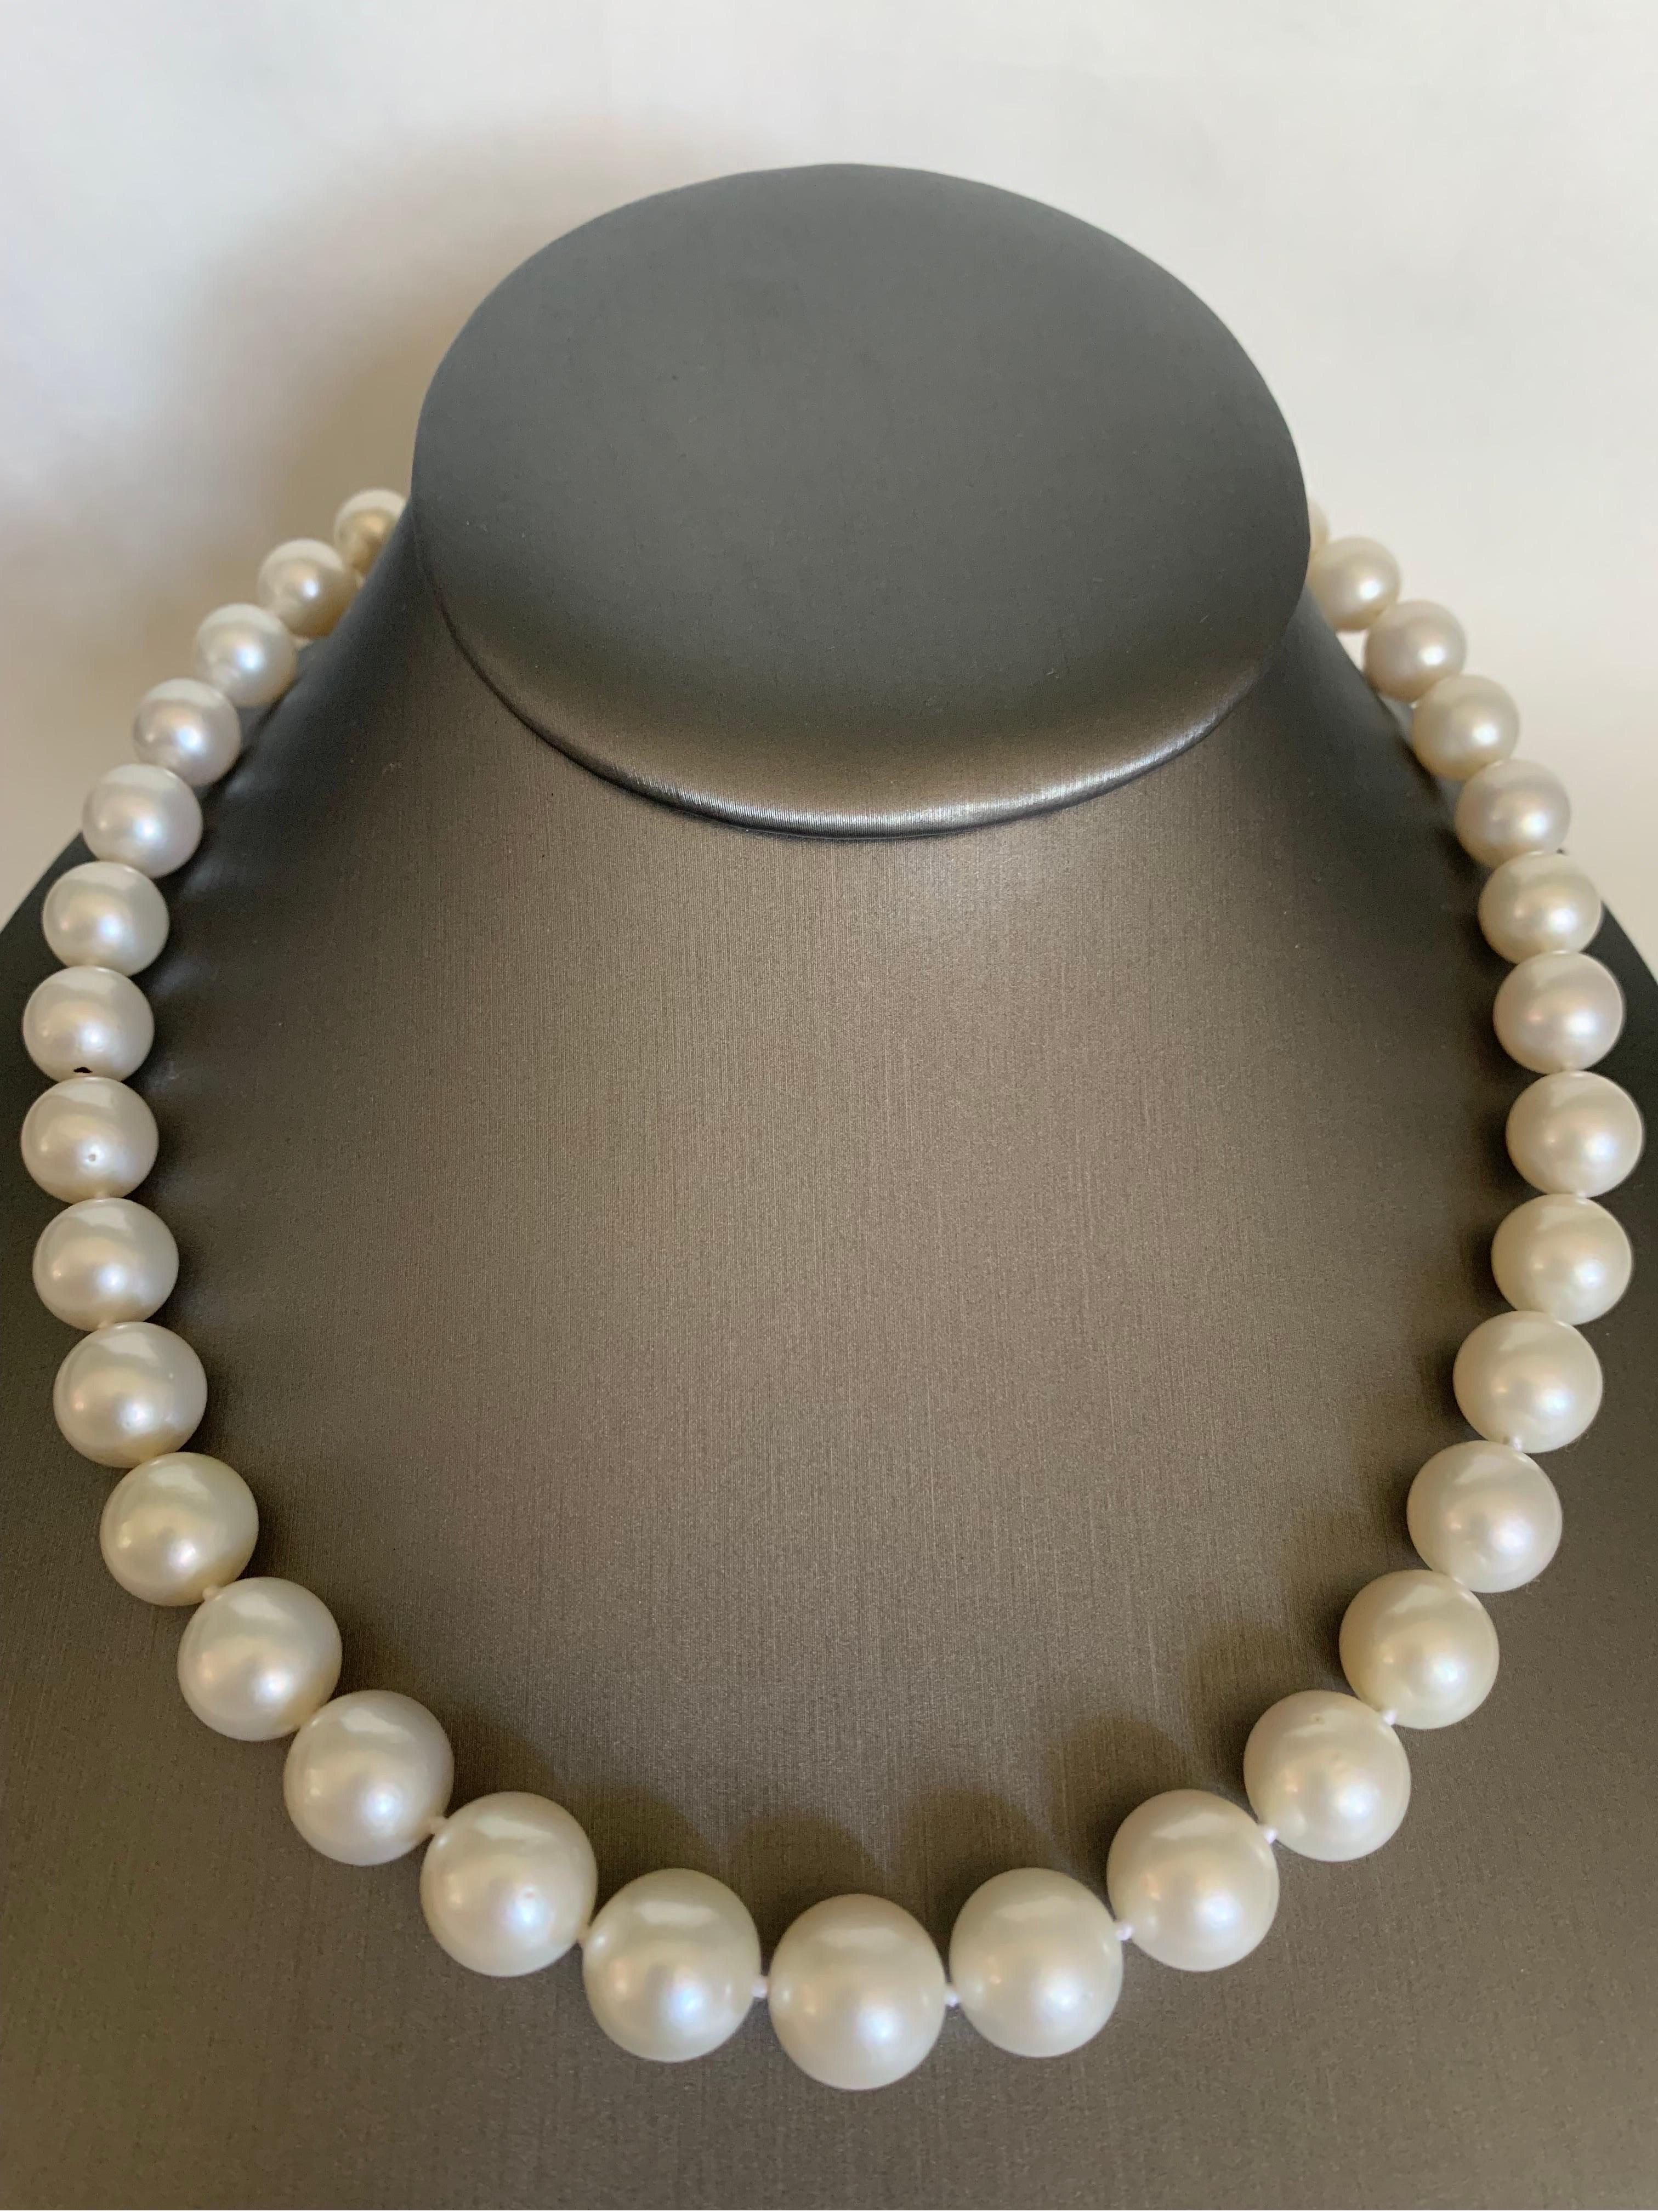 Elevate your look with a timeless graduated pearl necklace. This  17-18 inches long strand necklace is fully knotted and hand strung with matching silk cord. The necklace comprises 39 lustrous white south sea pearls measuring 9-11.8 mm and closure